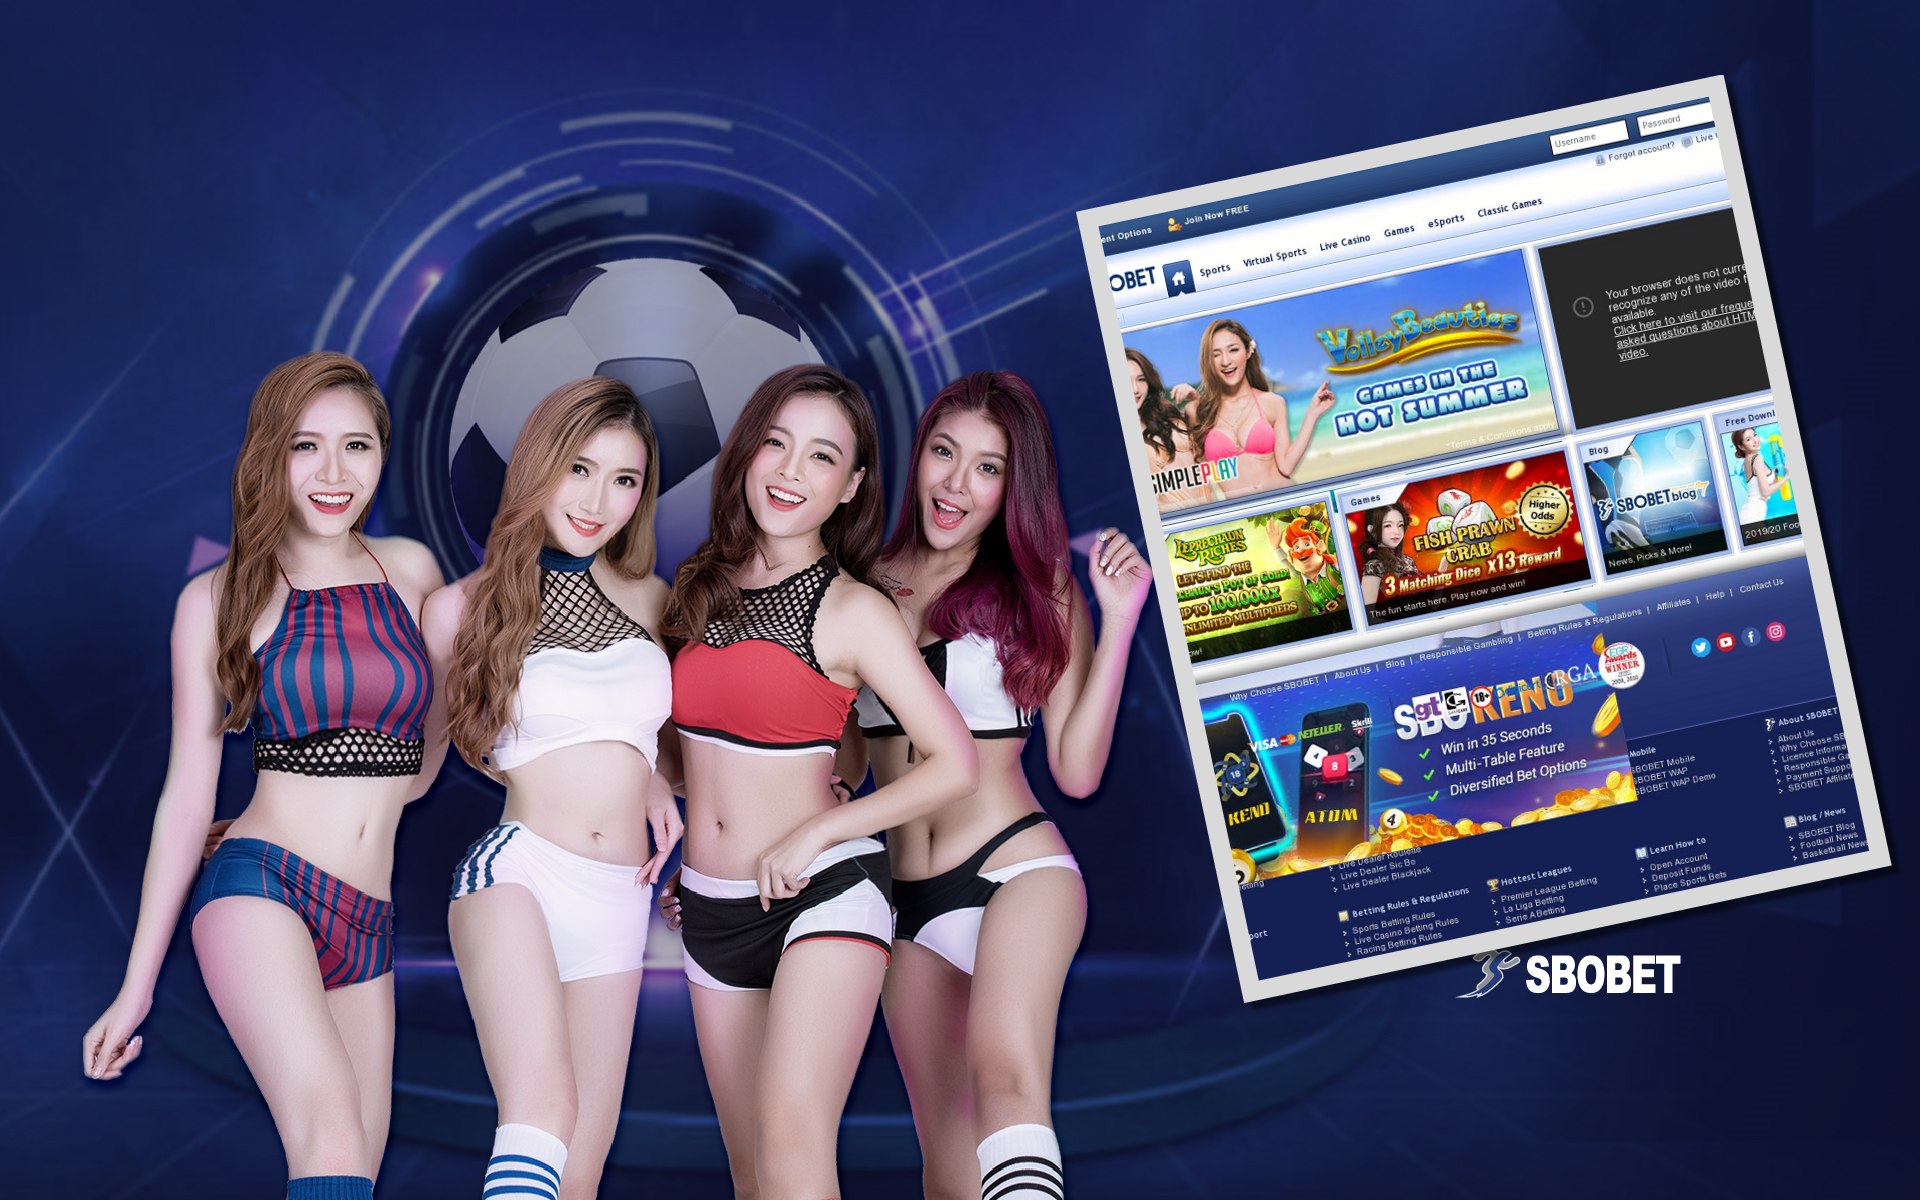 Open Mike on asian bookies, asian bookmakers, online betting malaysia, asian betting sites, best asian bookmakers, asian sports bookmakers, sports betting malaysia, online sports betting malaysia, singapore online sportsbook